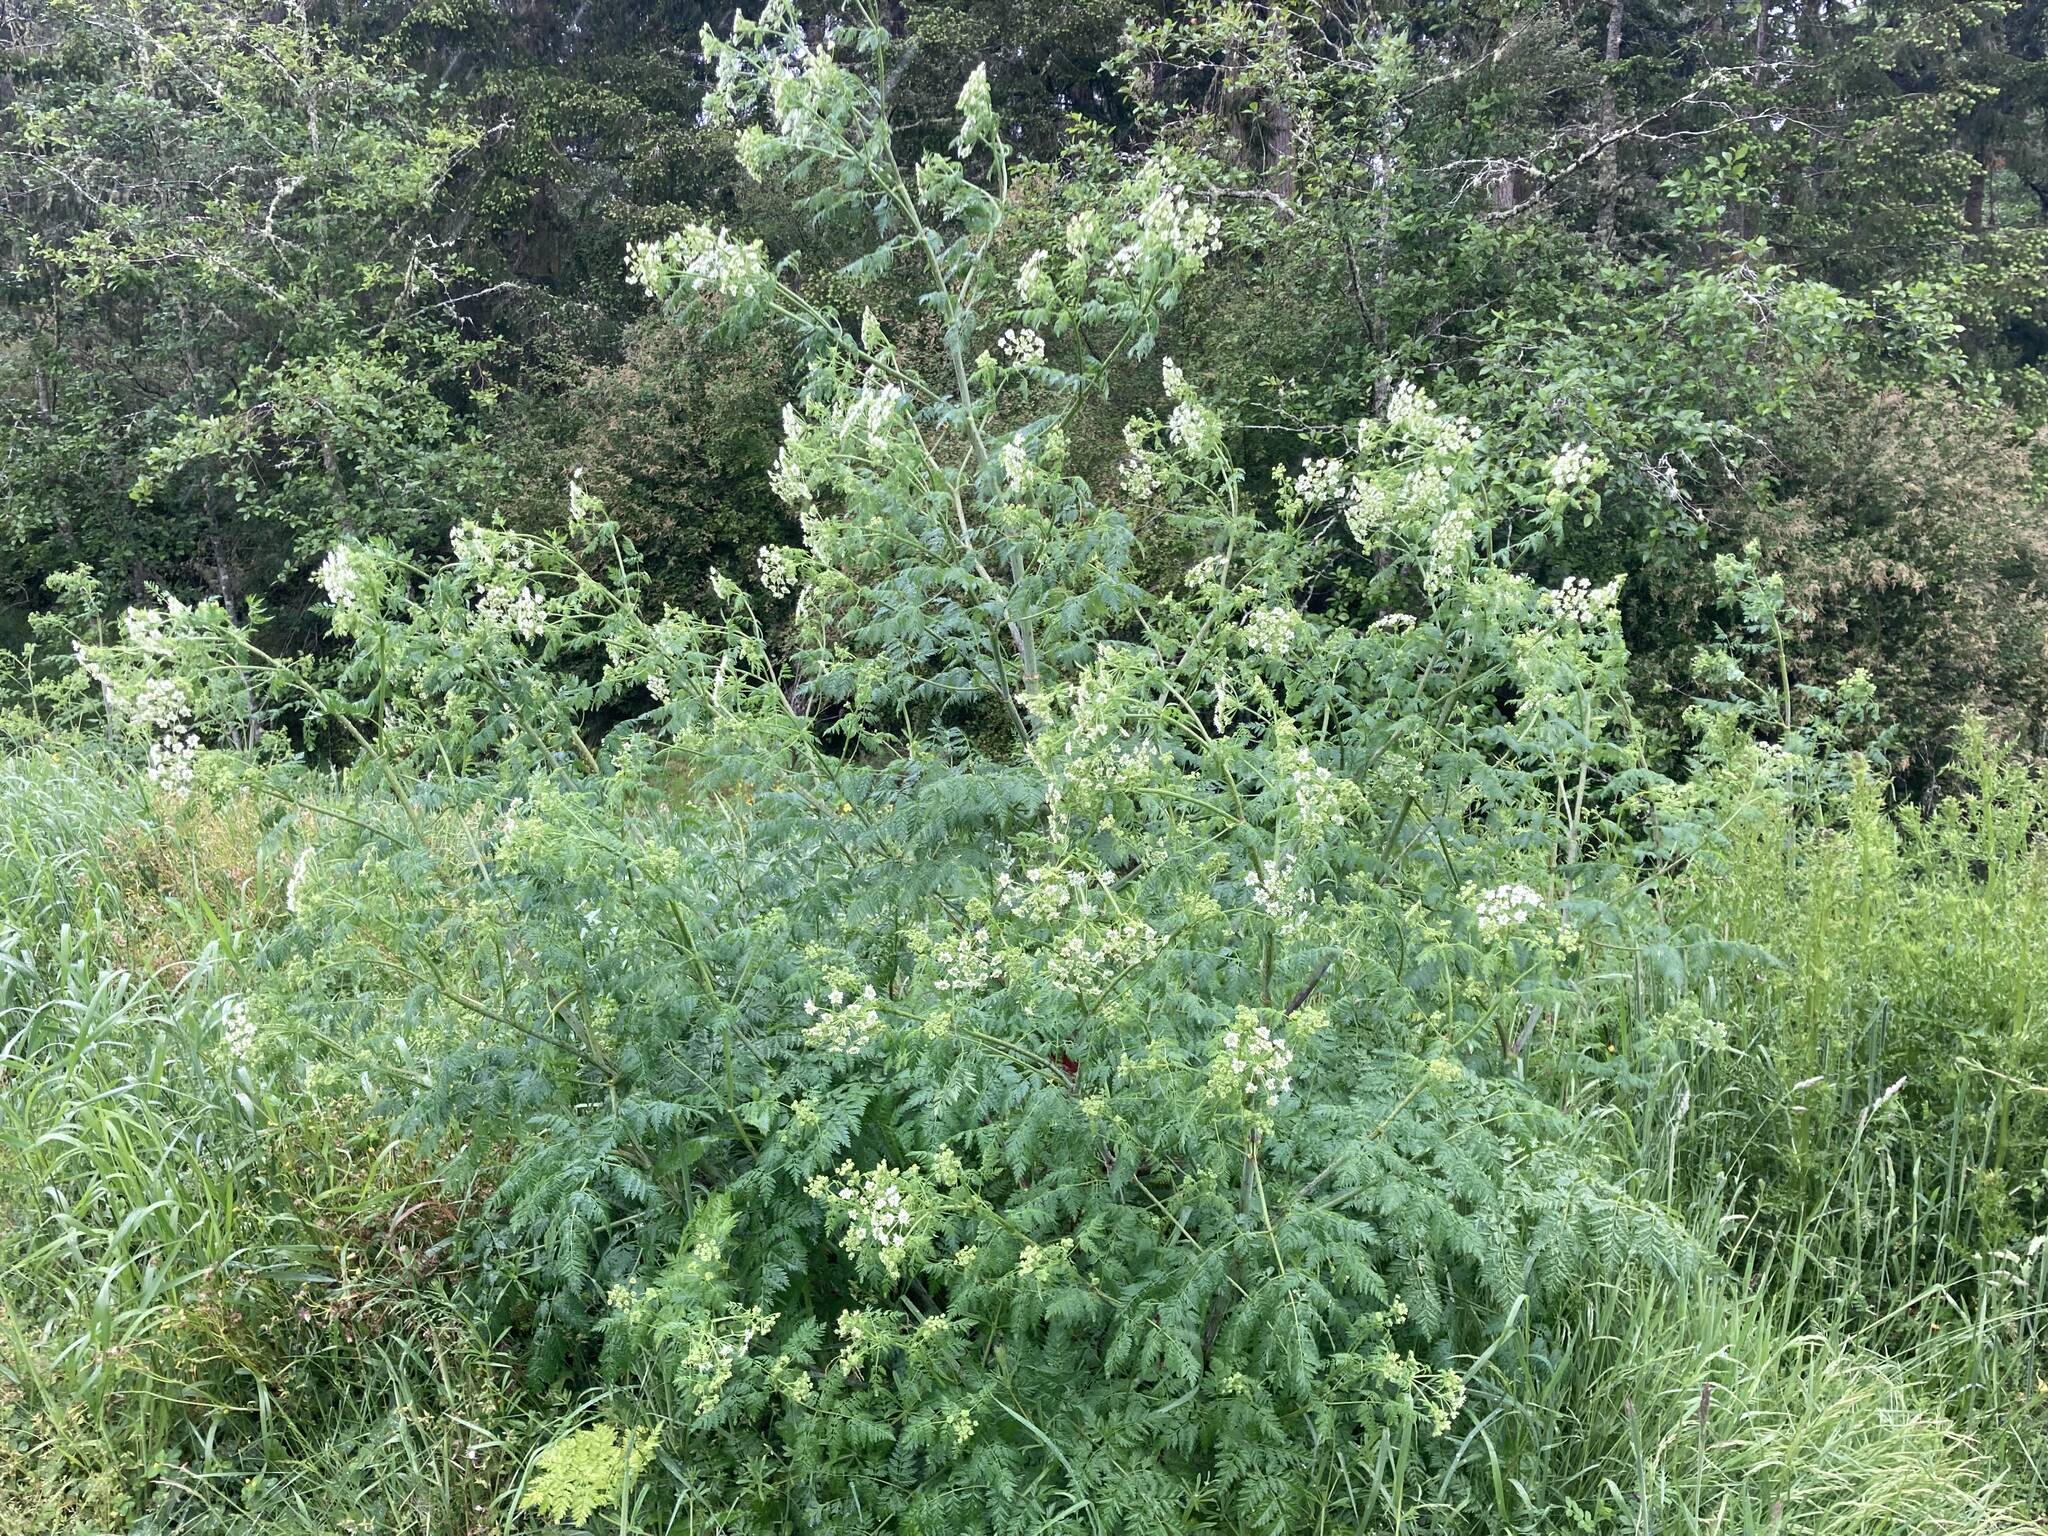 A patch of poison hemlock in bloom on Whidbey Island. (Photo provided)